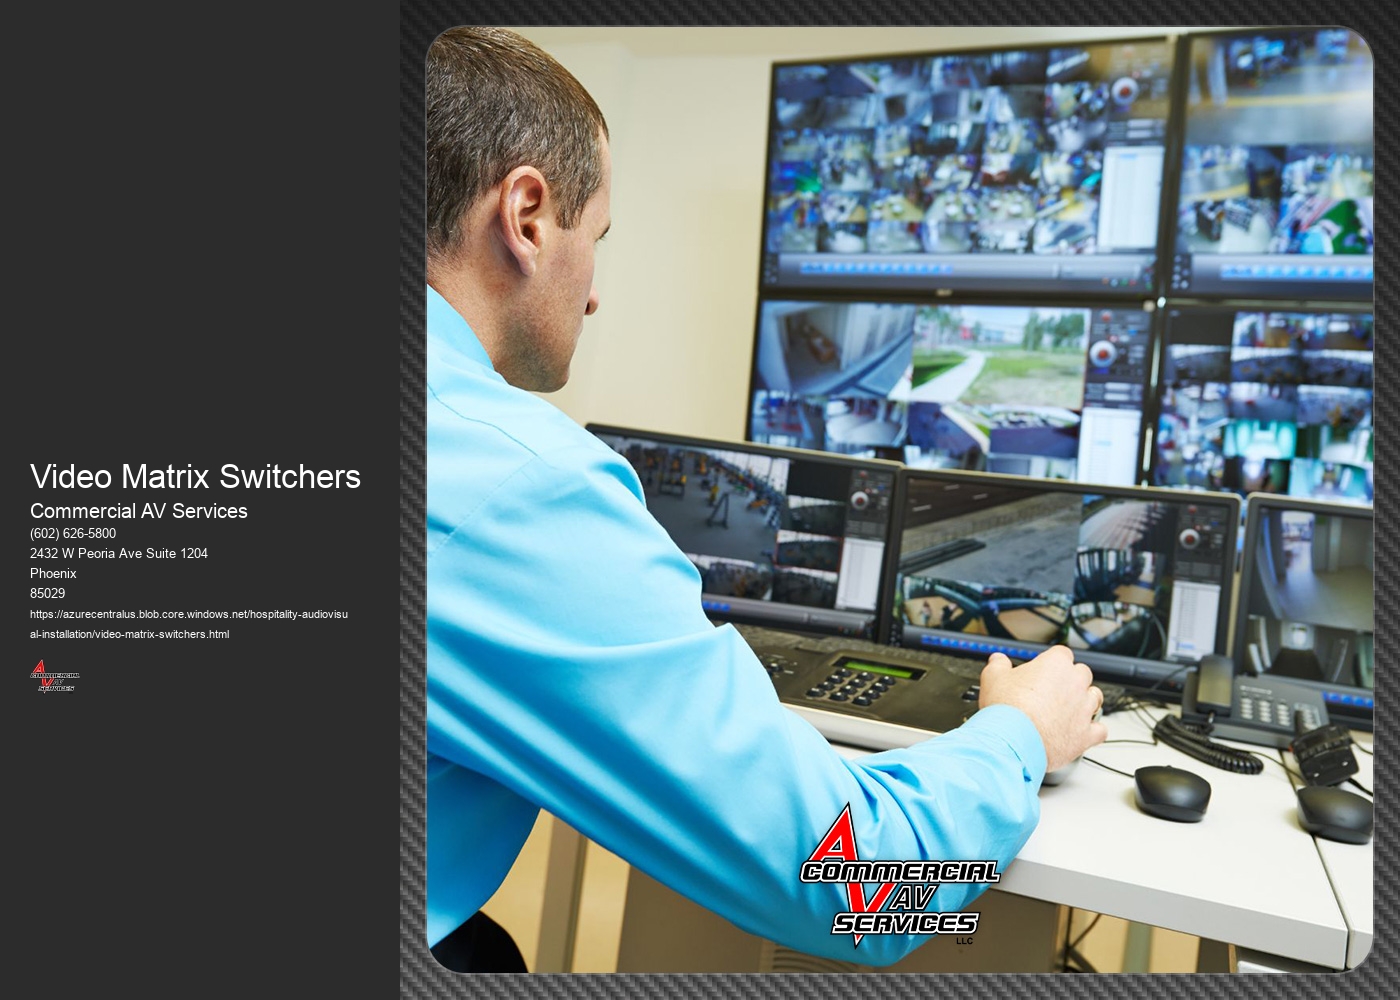 Can a video matrix switcher be controlled remotely or integrated into a larger AV system?